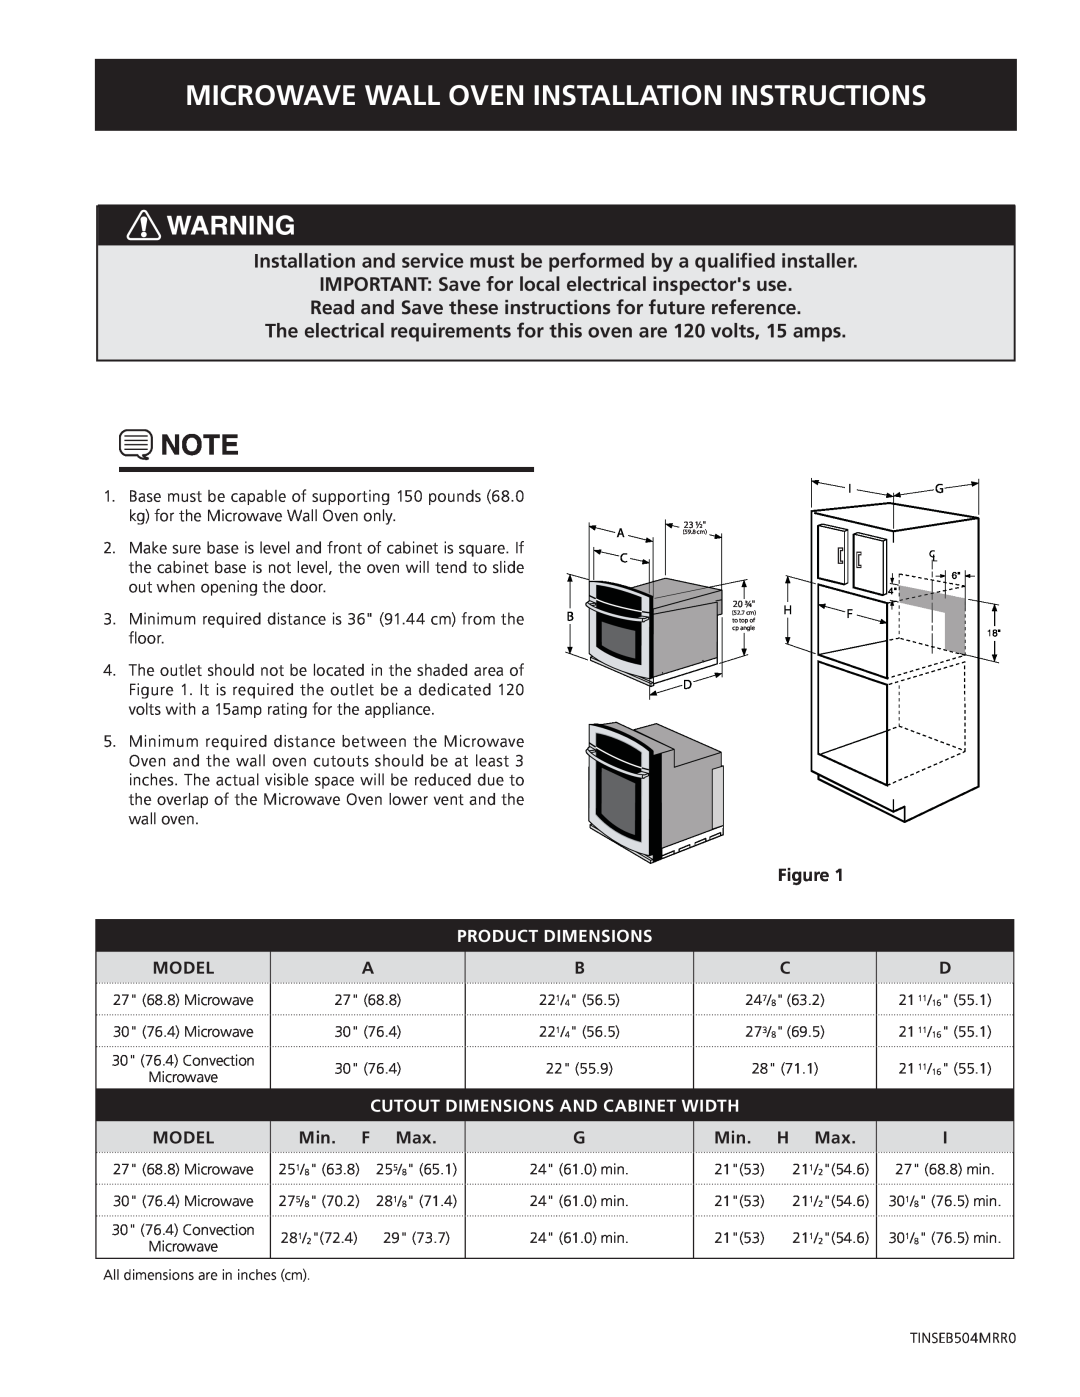 Electrolux E30MO75HPS dimensions Microwave Wall Oven Installation Instructions, Product Dimensions 